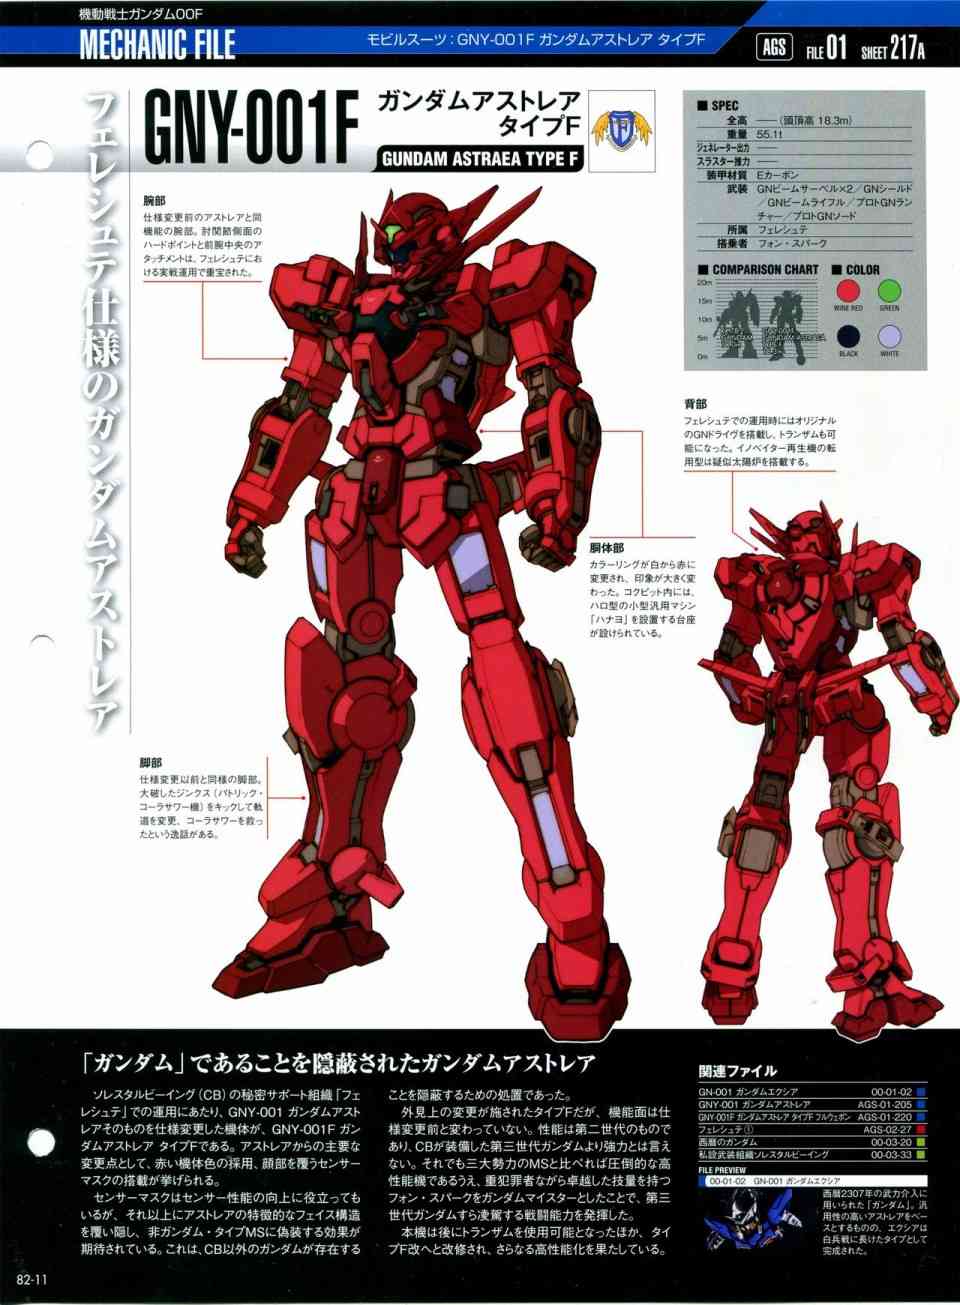 The Official Gundam Perfect File  - 第81-90話(1/7) - 7